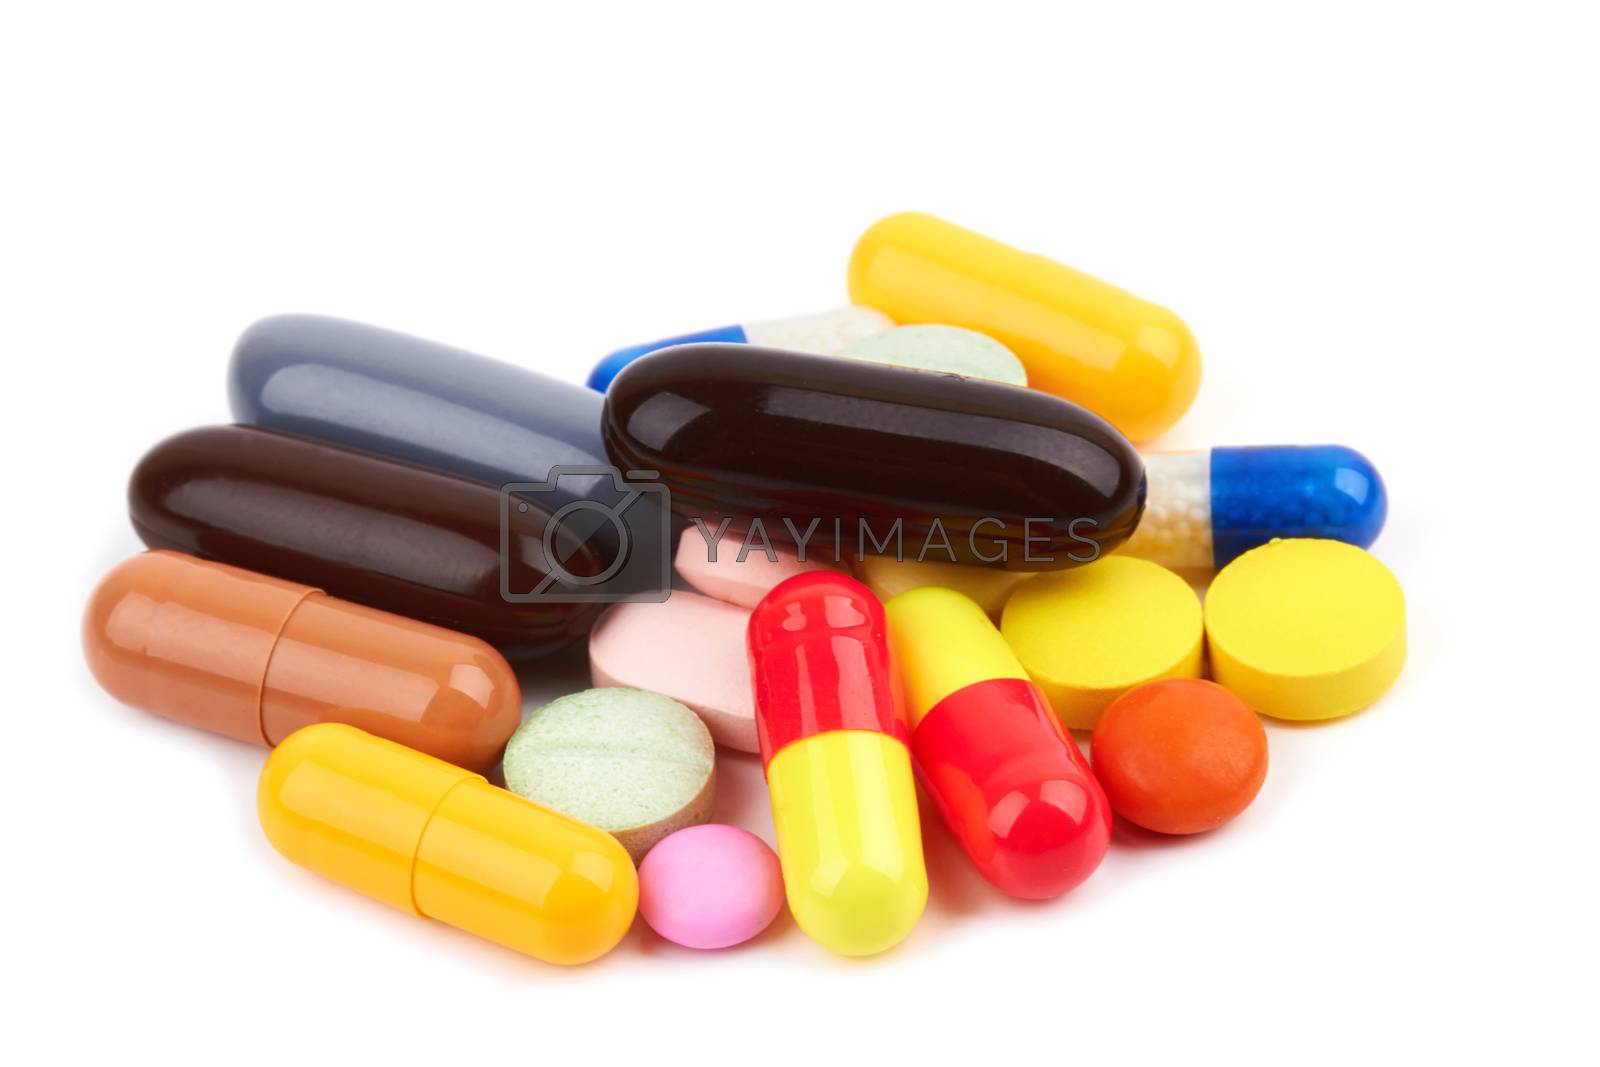 Royalty free image of pills and capsules by pioneer111